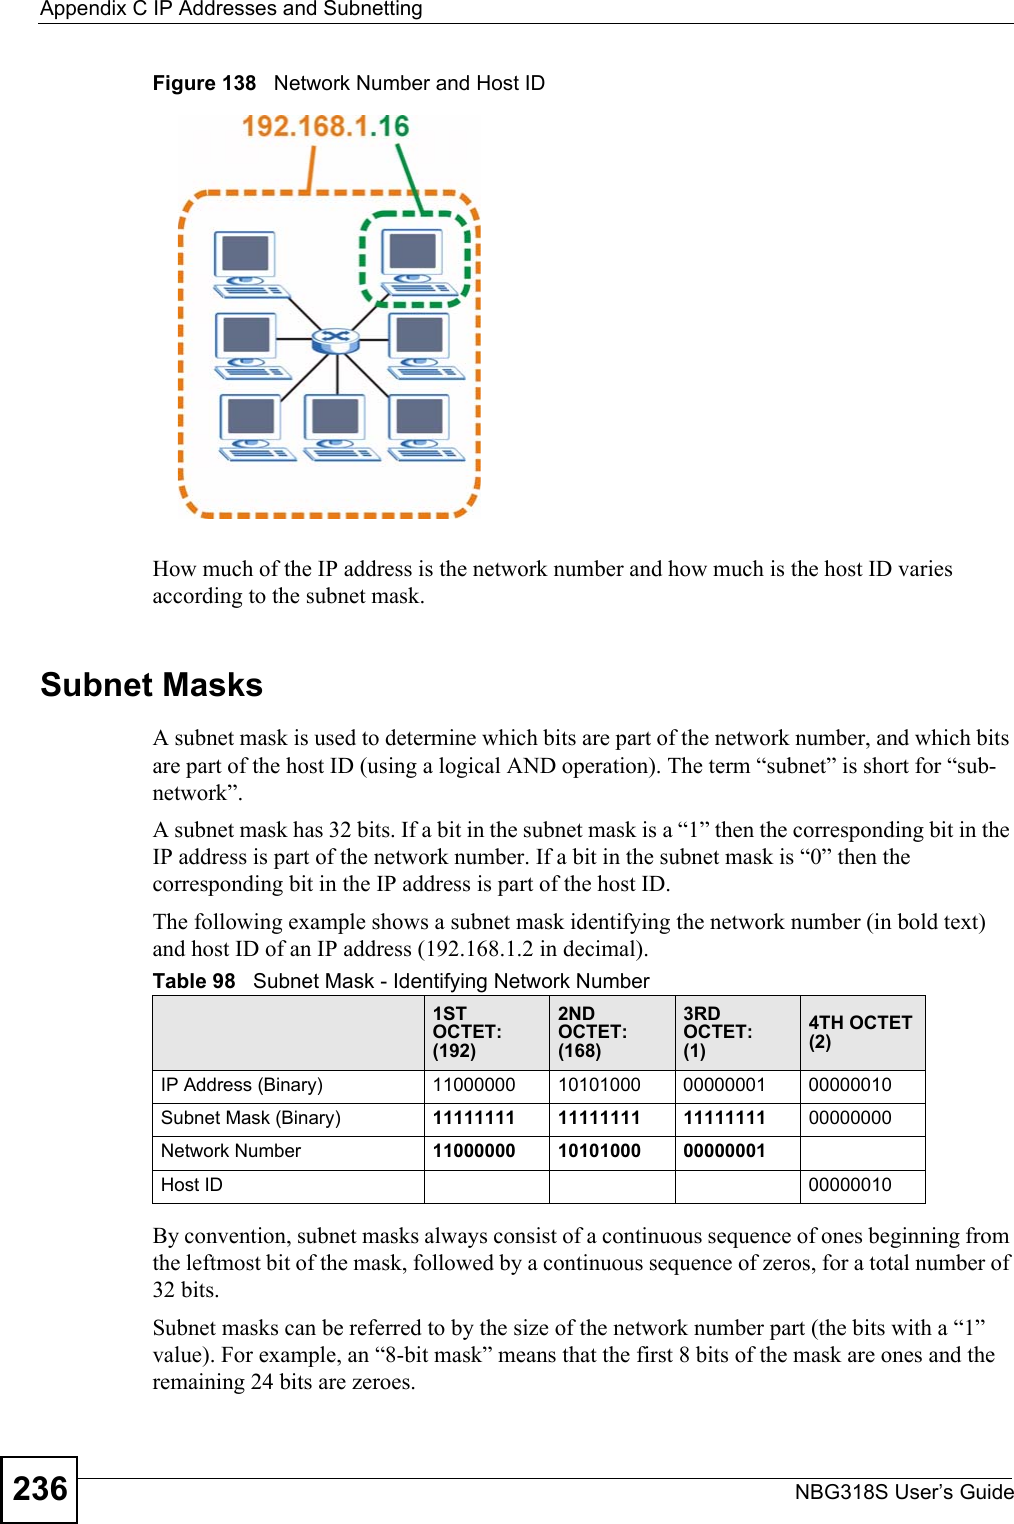 Appendix C IP Addresses and SubnettingNBG318S User’s Guide236Figure 138   Network Number and Host IDHow much of the IP address is the network number and how much is the host ID varies according to the subnet mask. Subnet MasksA subnet mask is used to determine which bits are part of the network number, and which bits are part of the host ID (using a logical AND operation). The term “subnet” is short for “sub-network”.A subnet mask has 32 bits. If a bit in the subnet mask is a “1” then the corresponding bit in the IP address is part of the network number. If a bit in the subnet mask is “0” then the corresponding bit in the IP address is part of the host ID. The following example shows a subnet mask identifying the network number (in bold text) and host ID of an IP address (192.168.1.2 in decimal).By convention, subnet masks always consist of a continuous sequence of ones beginning from the leftmost bit of the mask, followed by a continuous sequence of zeros, for a total number of 32 bits.Subnet masks can be referred to by the size of the network number part (the bits with a “1” value). For example, an “8-bit mask” means that the first 8 bits of the mask are ones and the remaining 24 bits are zeroes.Table 98   Subnet Mask - Identifying Network Number1ST OCTET:(192)2ND OCTET:(168)3RD OCTET:(1)4TH OCTET(2)IP Address (Binary) 11000000 10101000 00000001 00000010Subnet Mask (Binary) 11111111 11111111 11111111 00000000Network Number 11000000 10101000 00000001Host ID 00000010